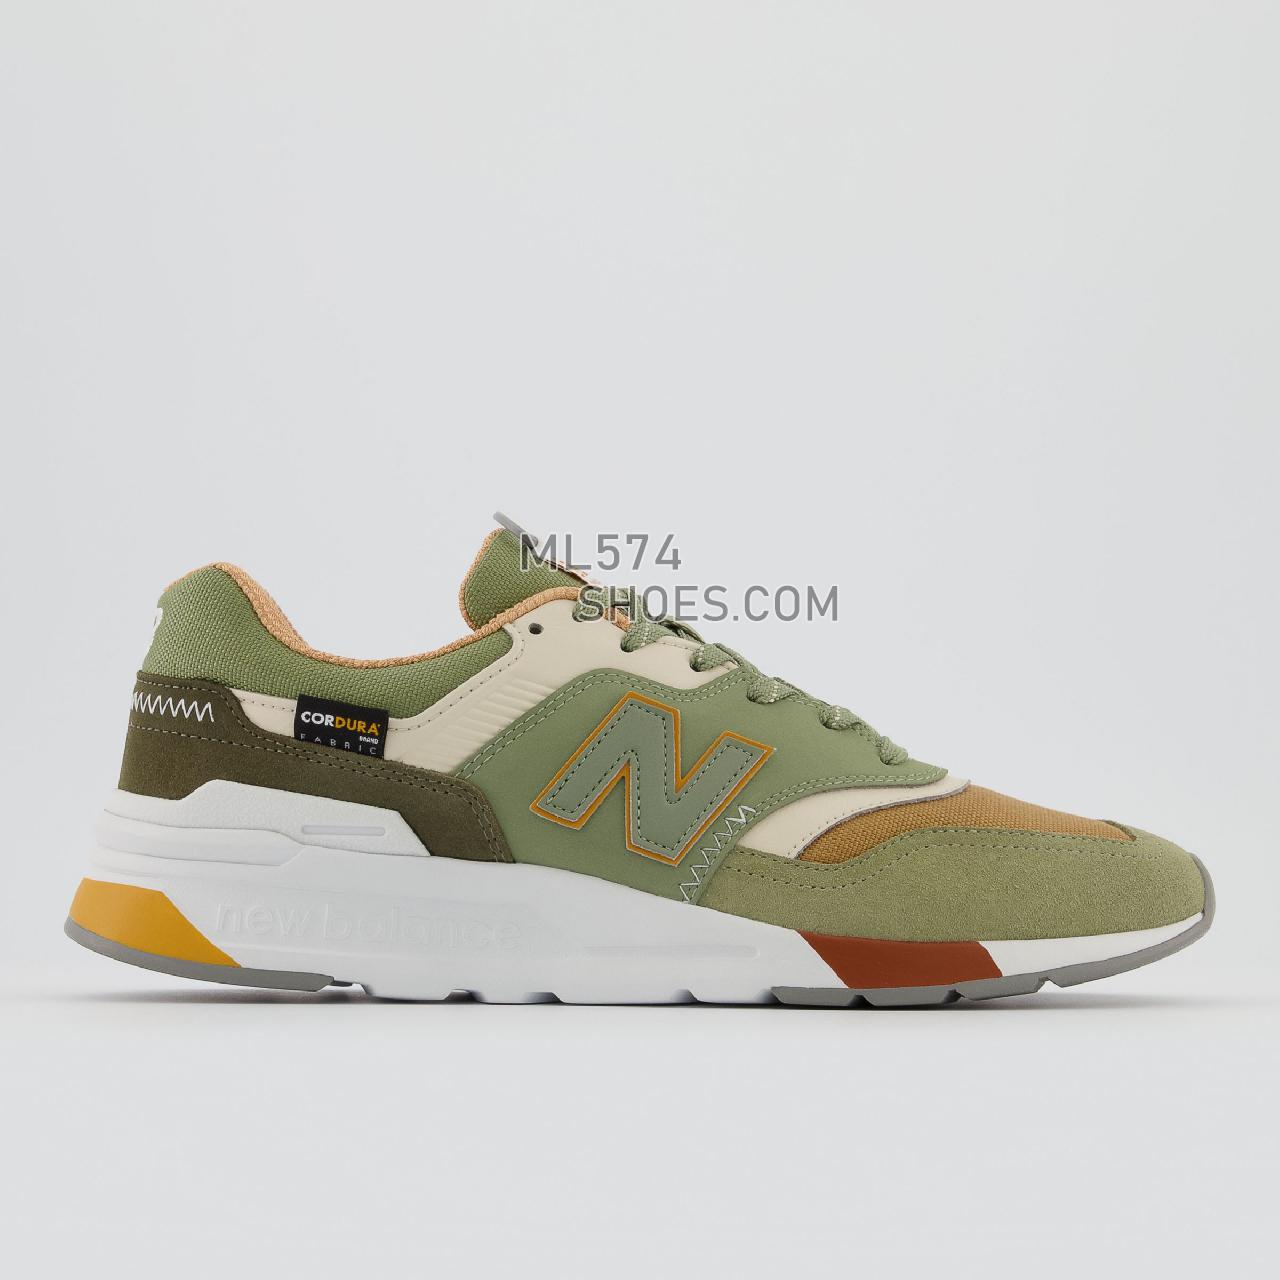 New Balance 997H - Men's Sport Style Sneakers - True Camo with Golden Hour - CM997HTJ